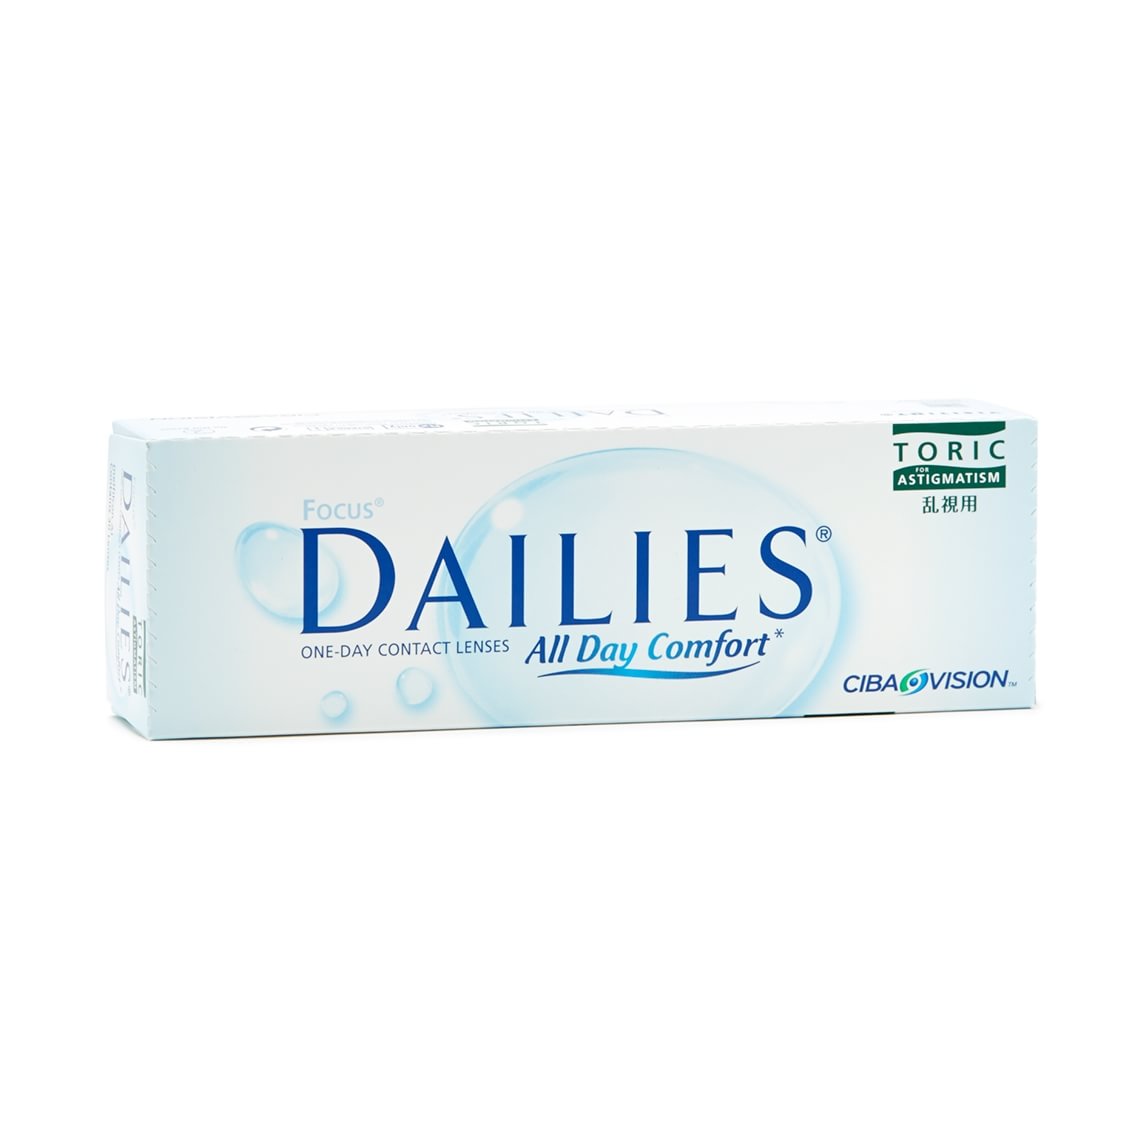 DAILIES All Day Comfort Toric